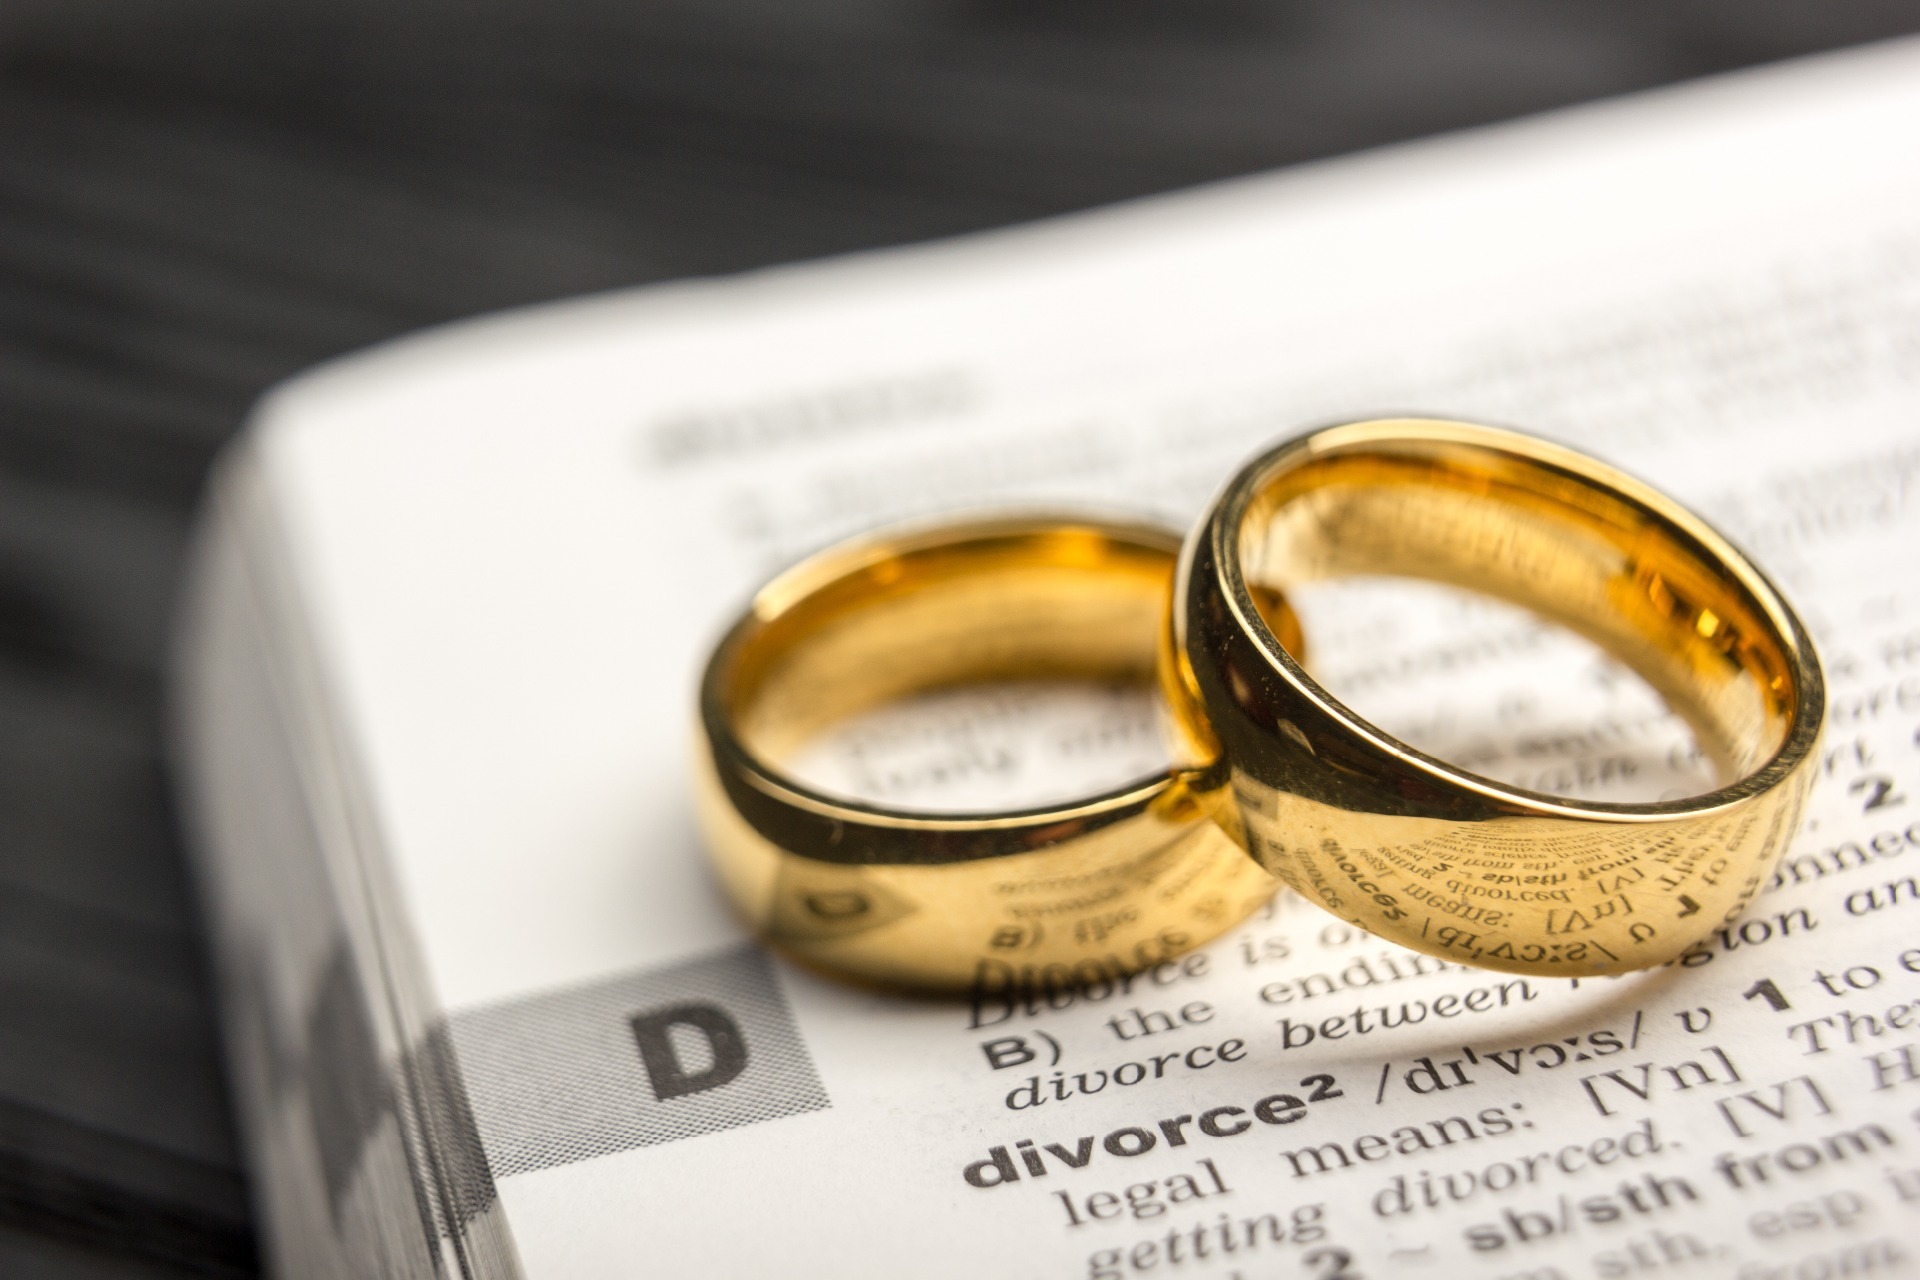 A pair of wedding rings resting on a dictionary.